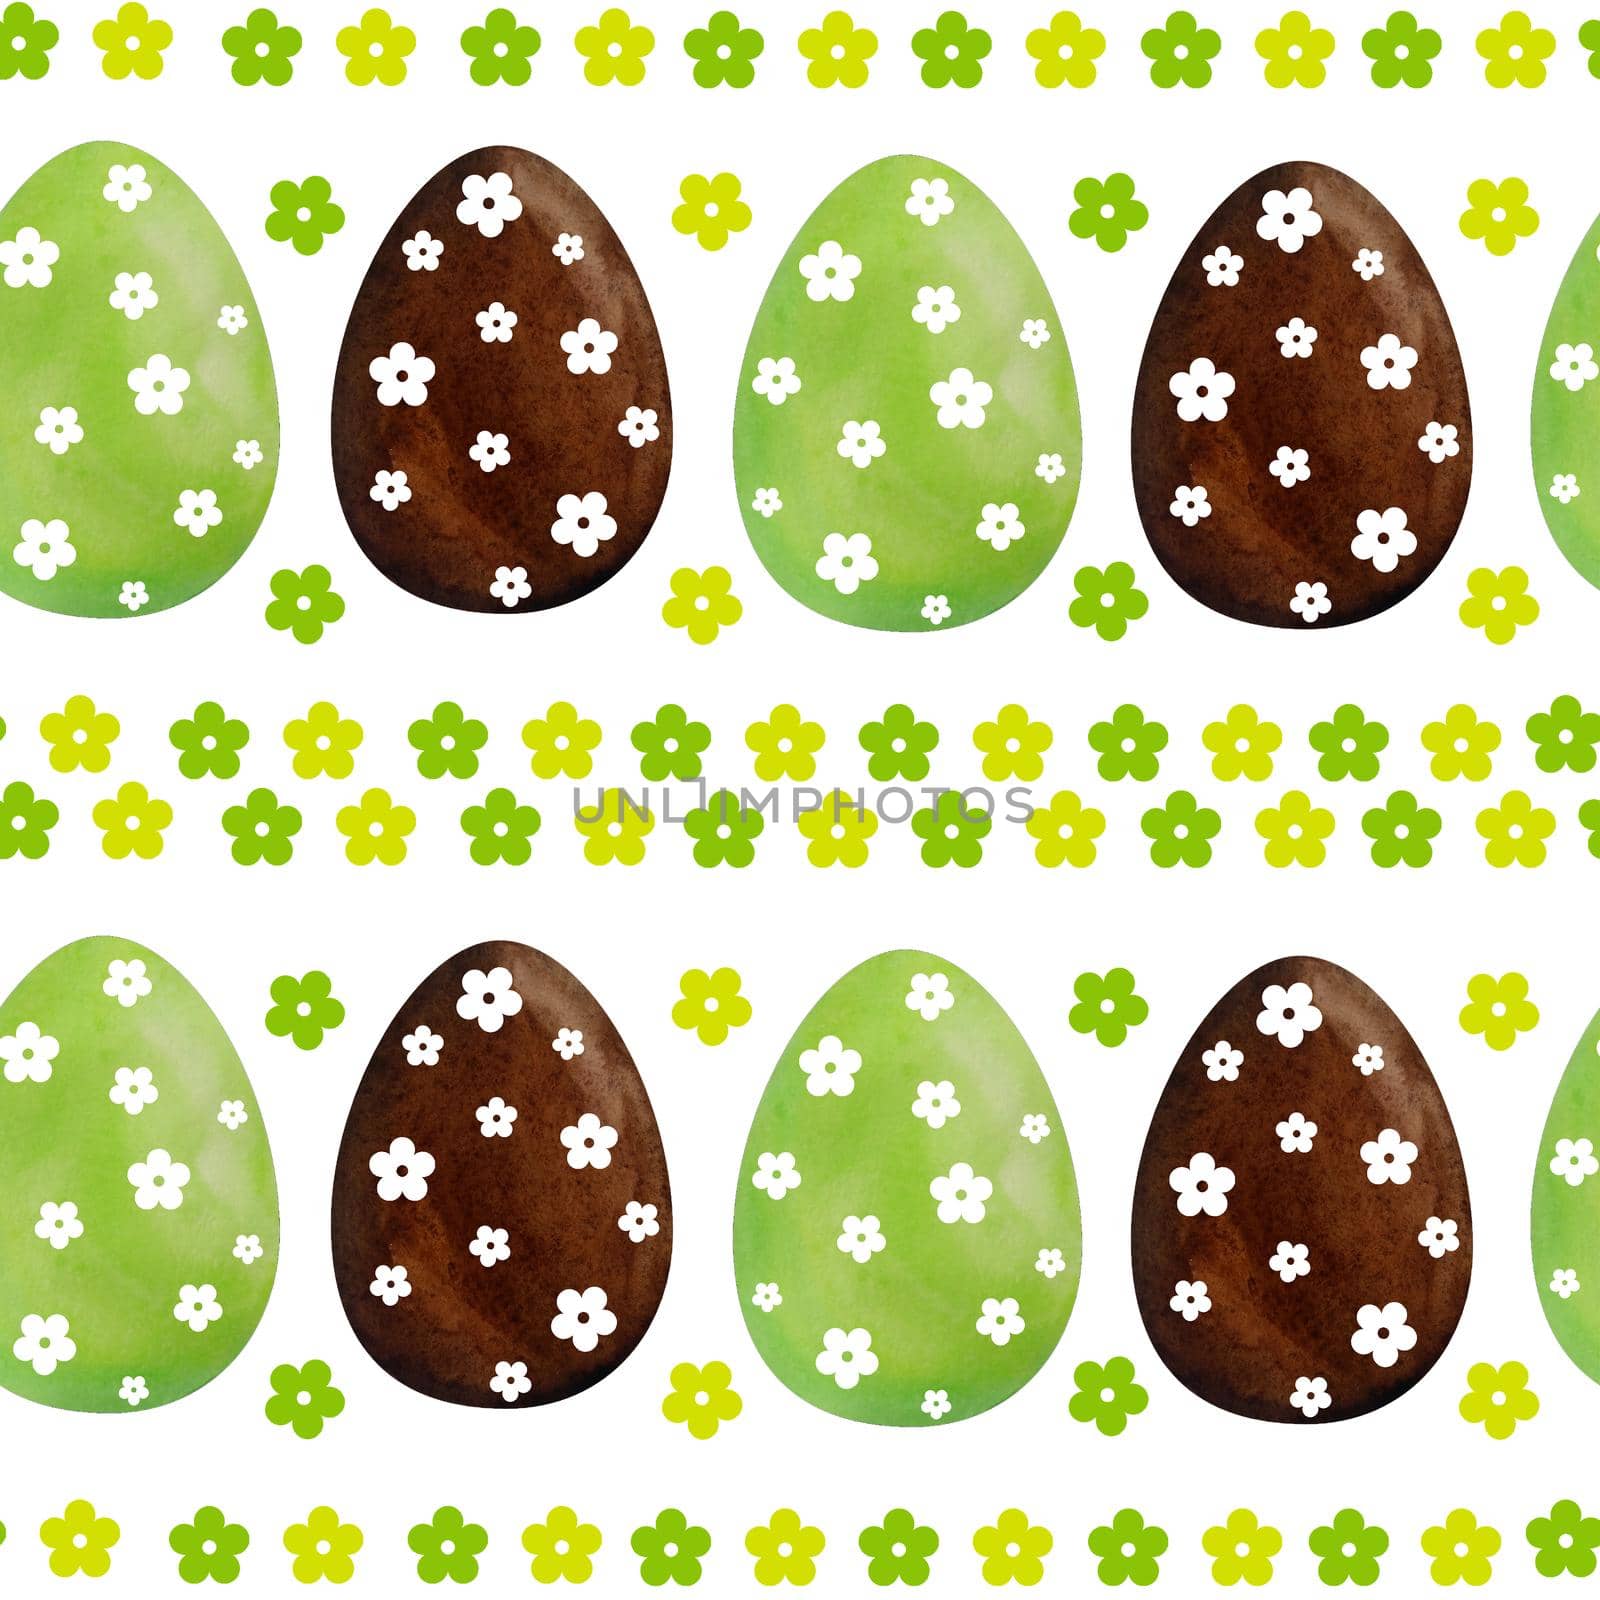 Seamless watercolor hand drawn pattern happy easter eggs of green brown chocolate color with polka dot ornament. Colored religious Christian symbols for cards invitation design celebration decoration. by Lagmar